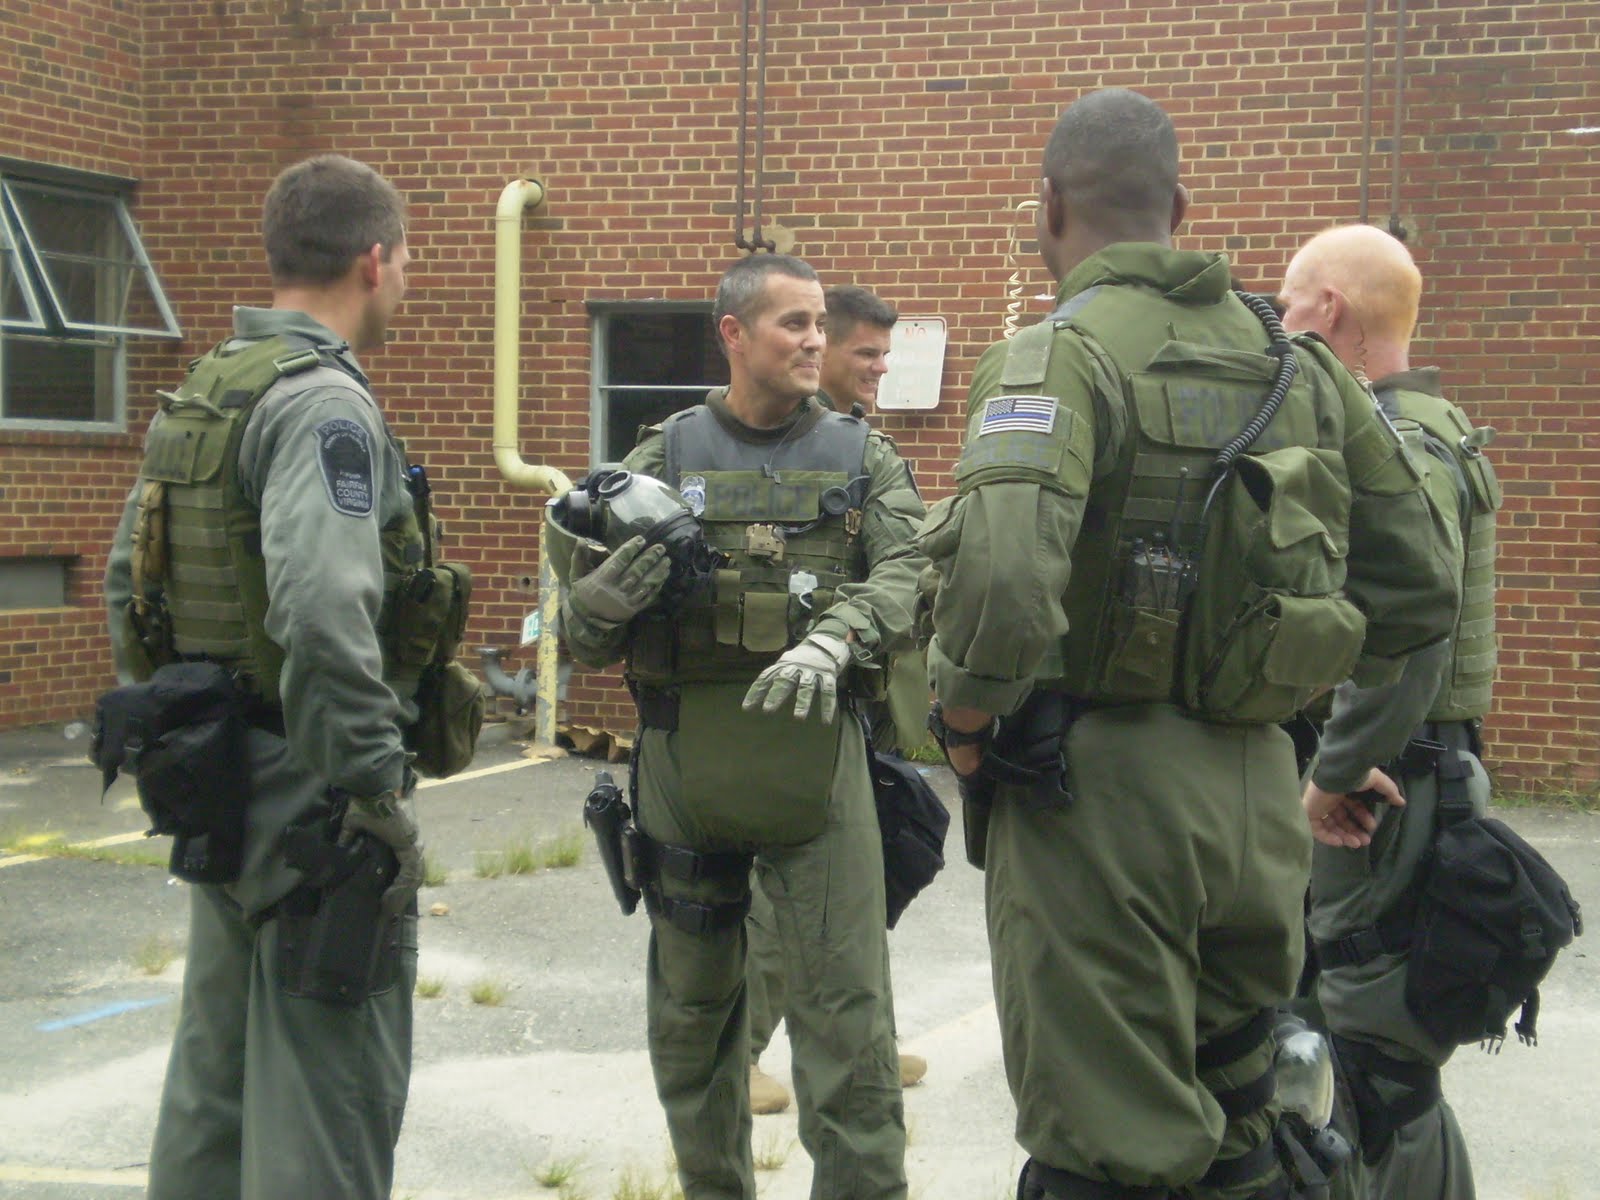 the Annandale Blog: Fairfax Police SWAT team conducts training exercise